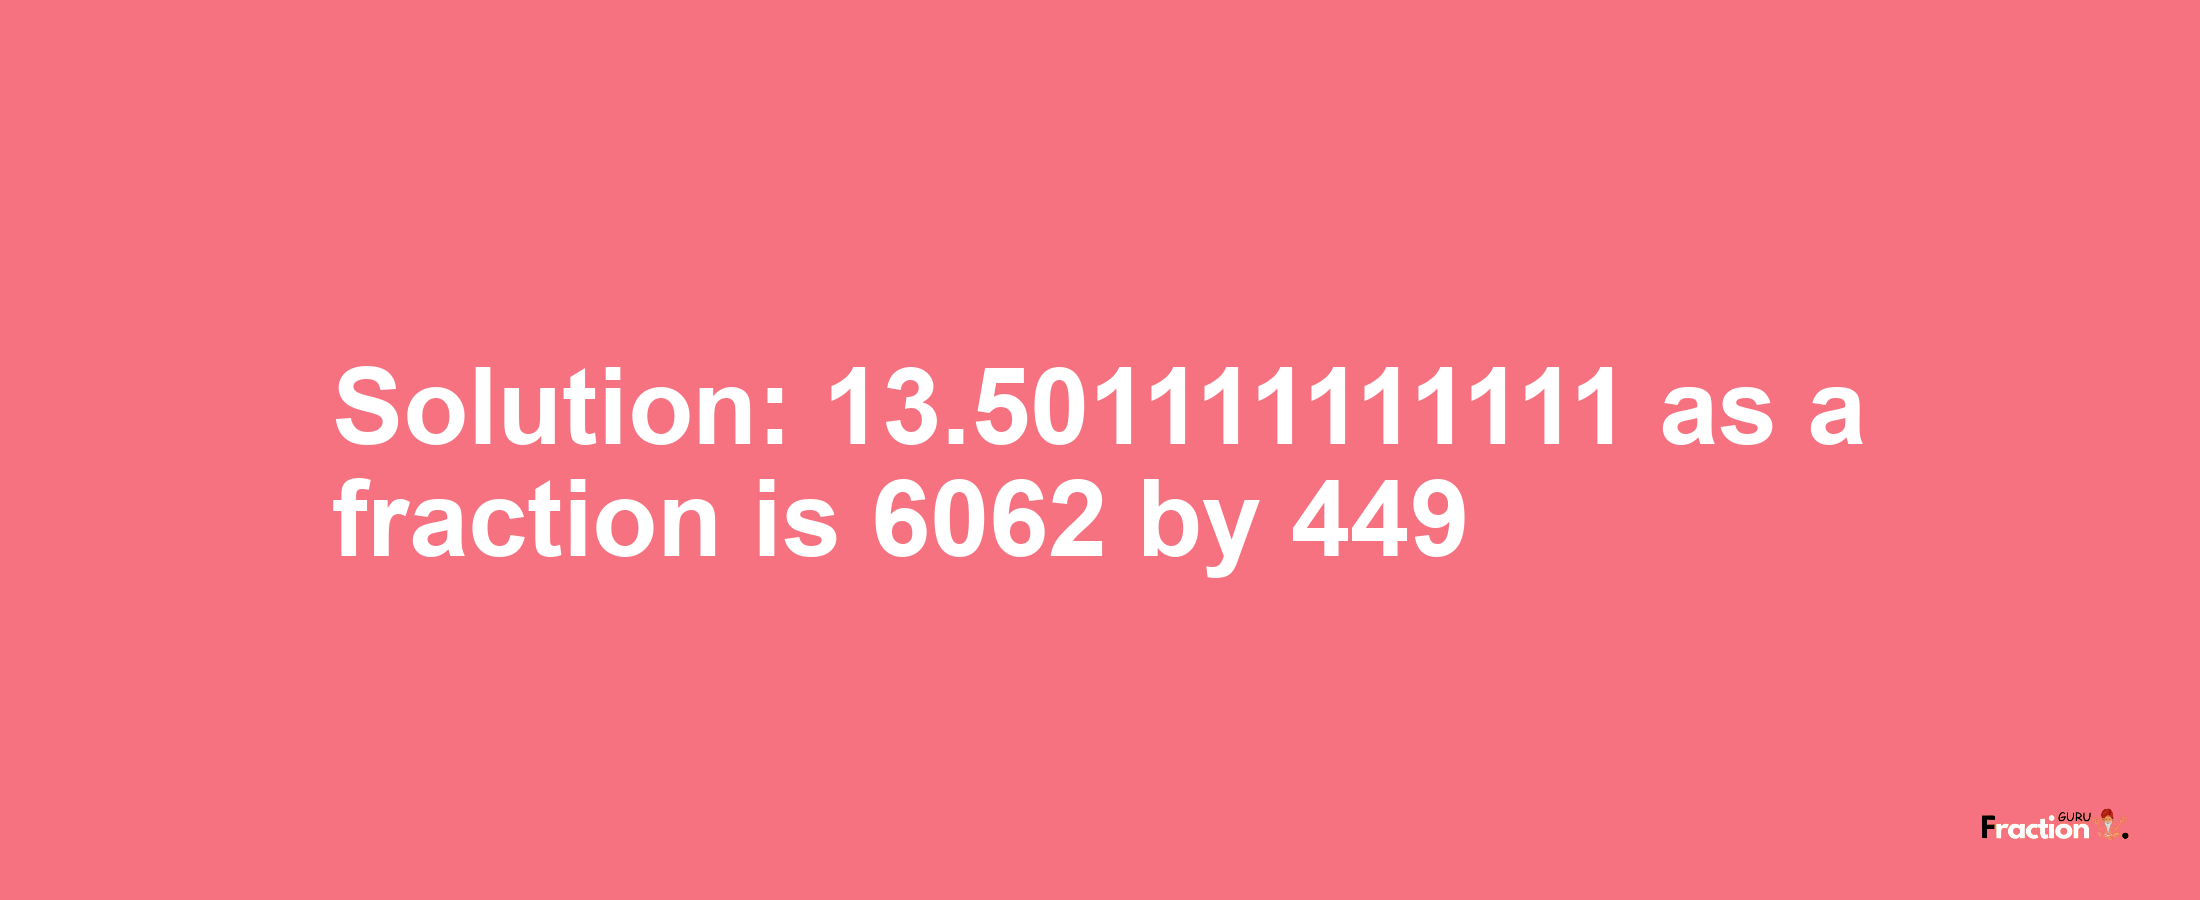 Solution:13.501111111111 as a fraction is 6062/449